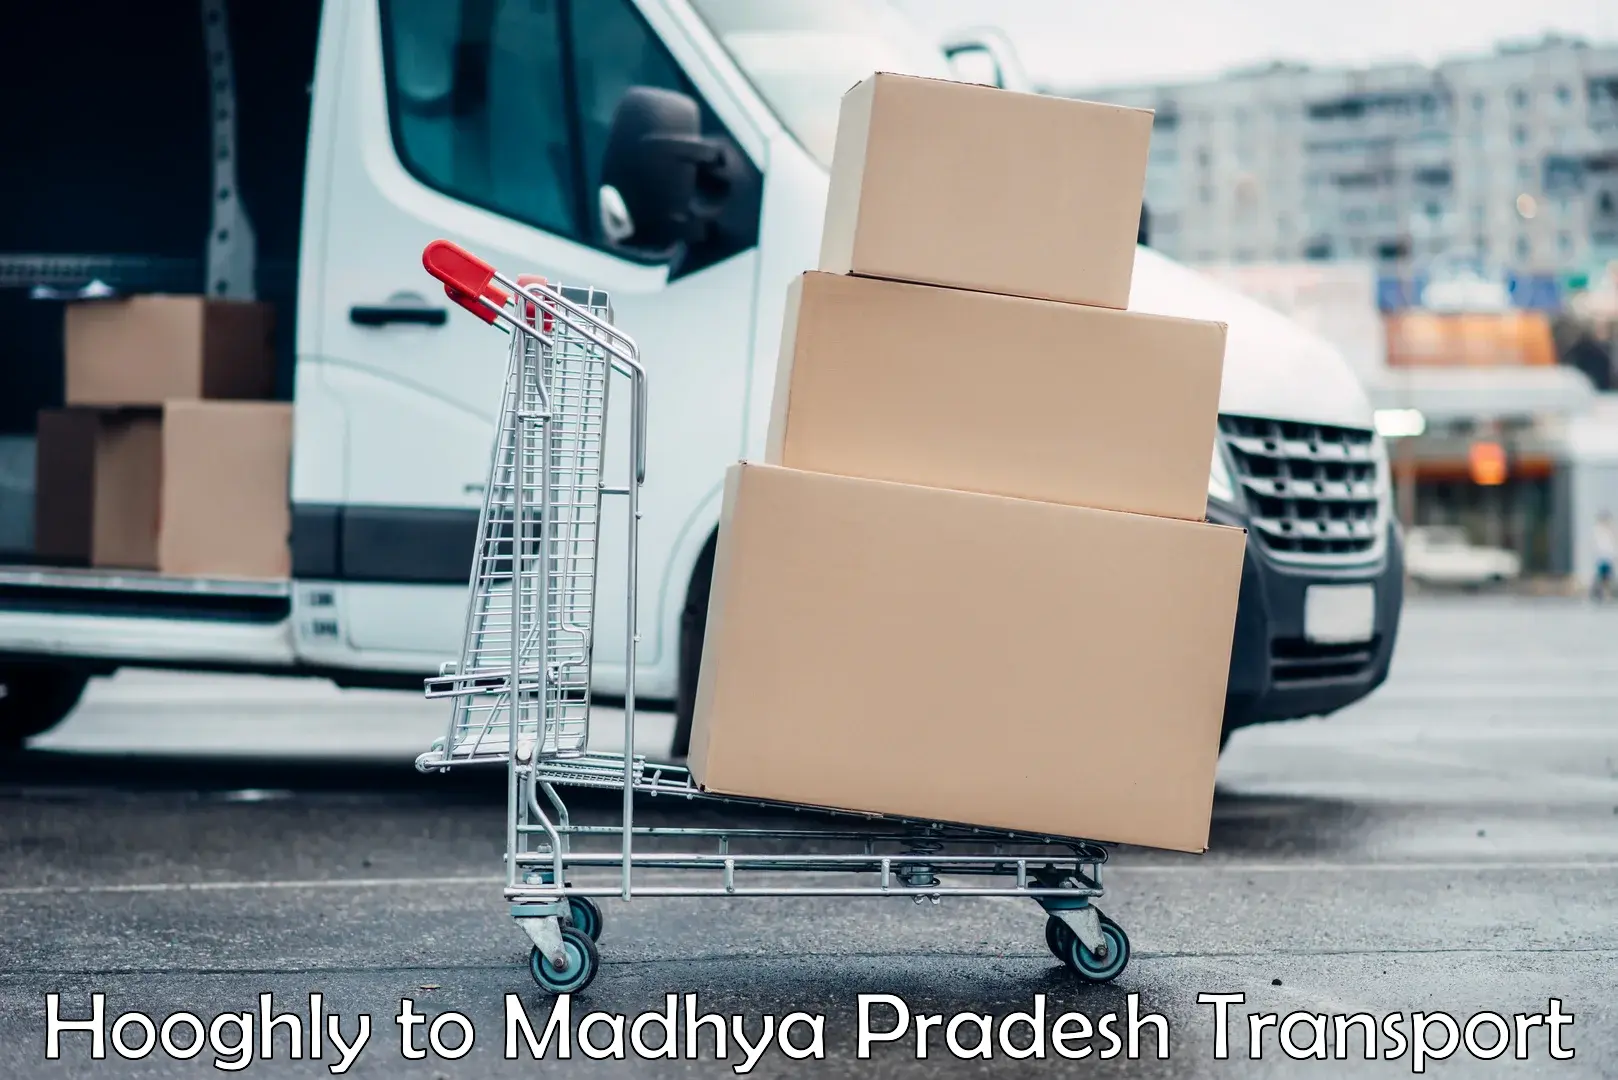 Goods delivery service Hooghly to Indore